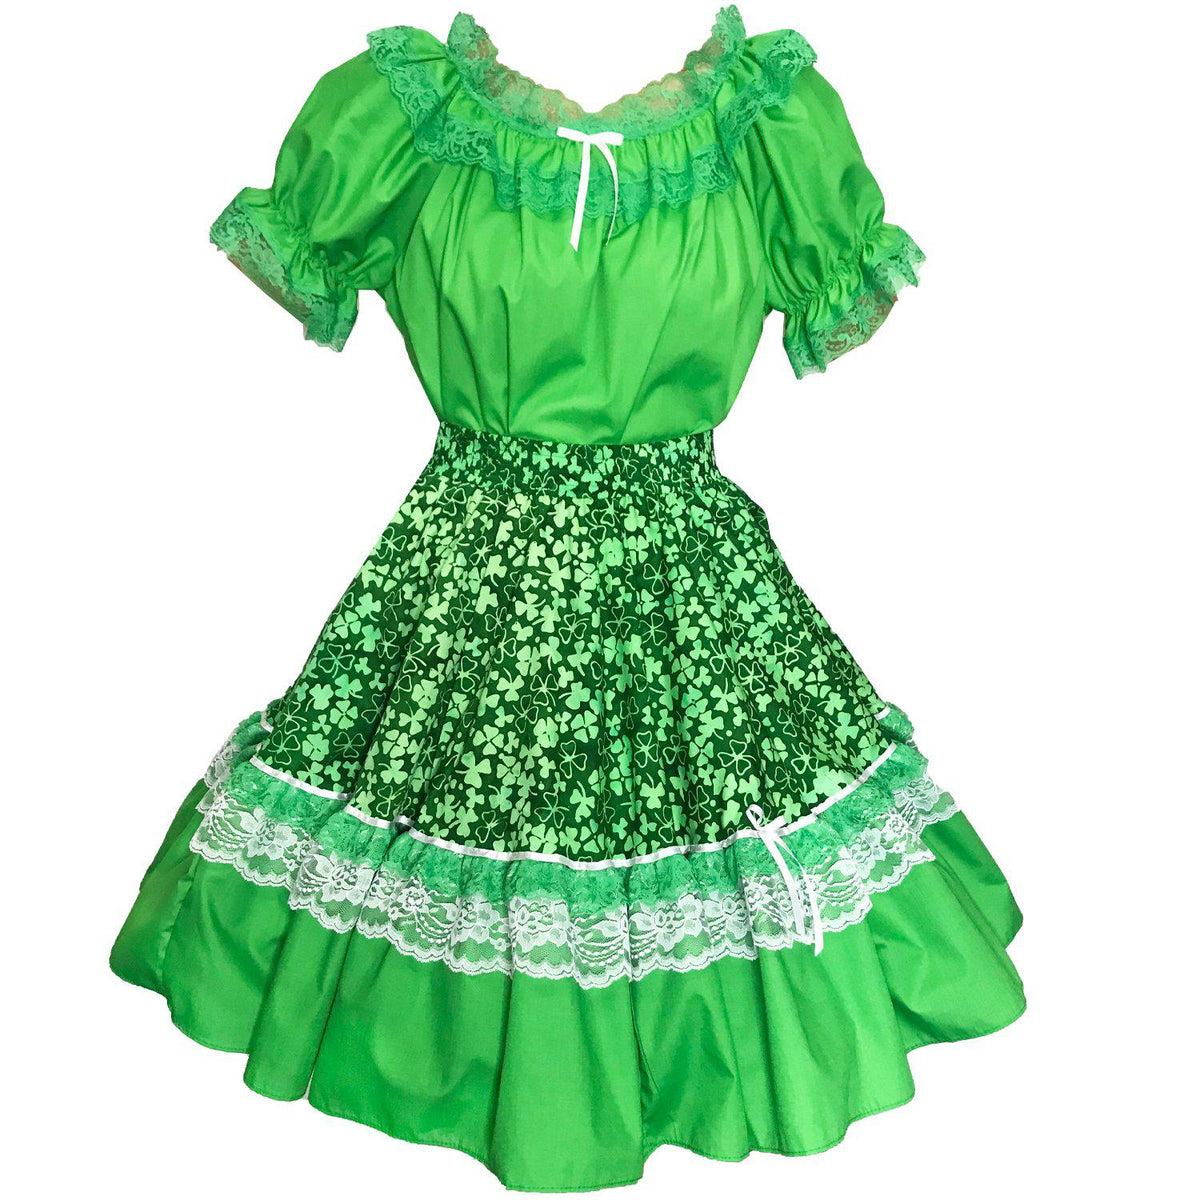 Luck of the Irish Square Dance Outfit